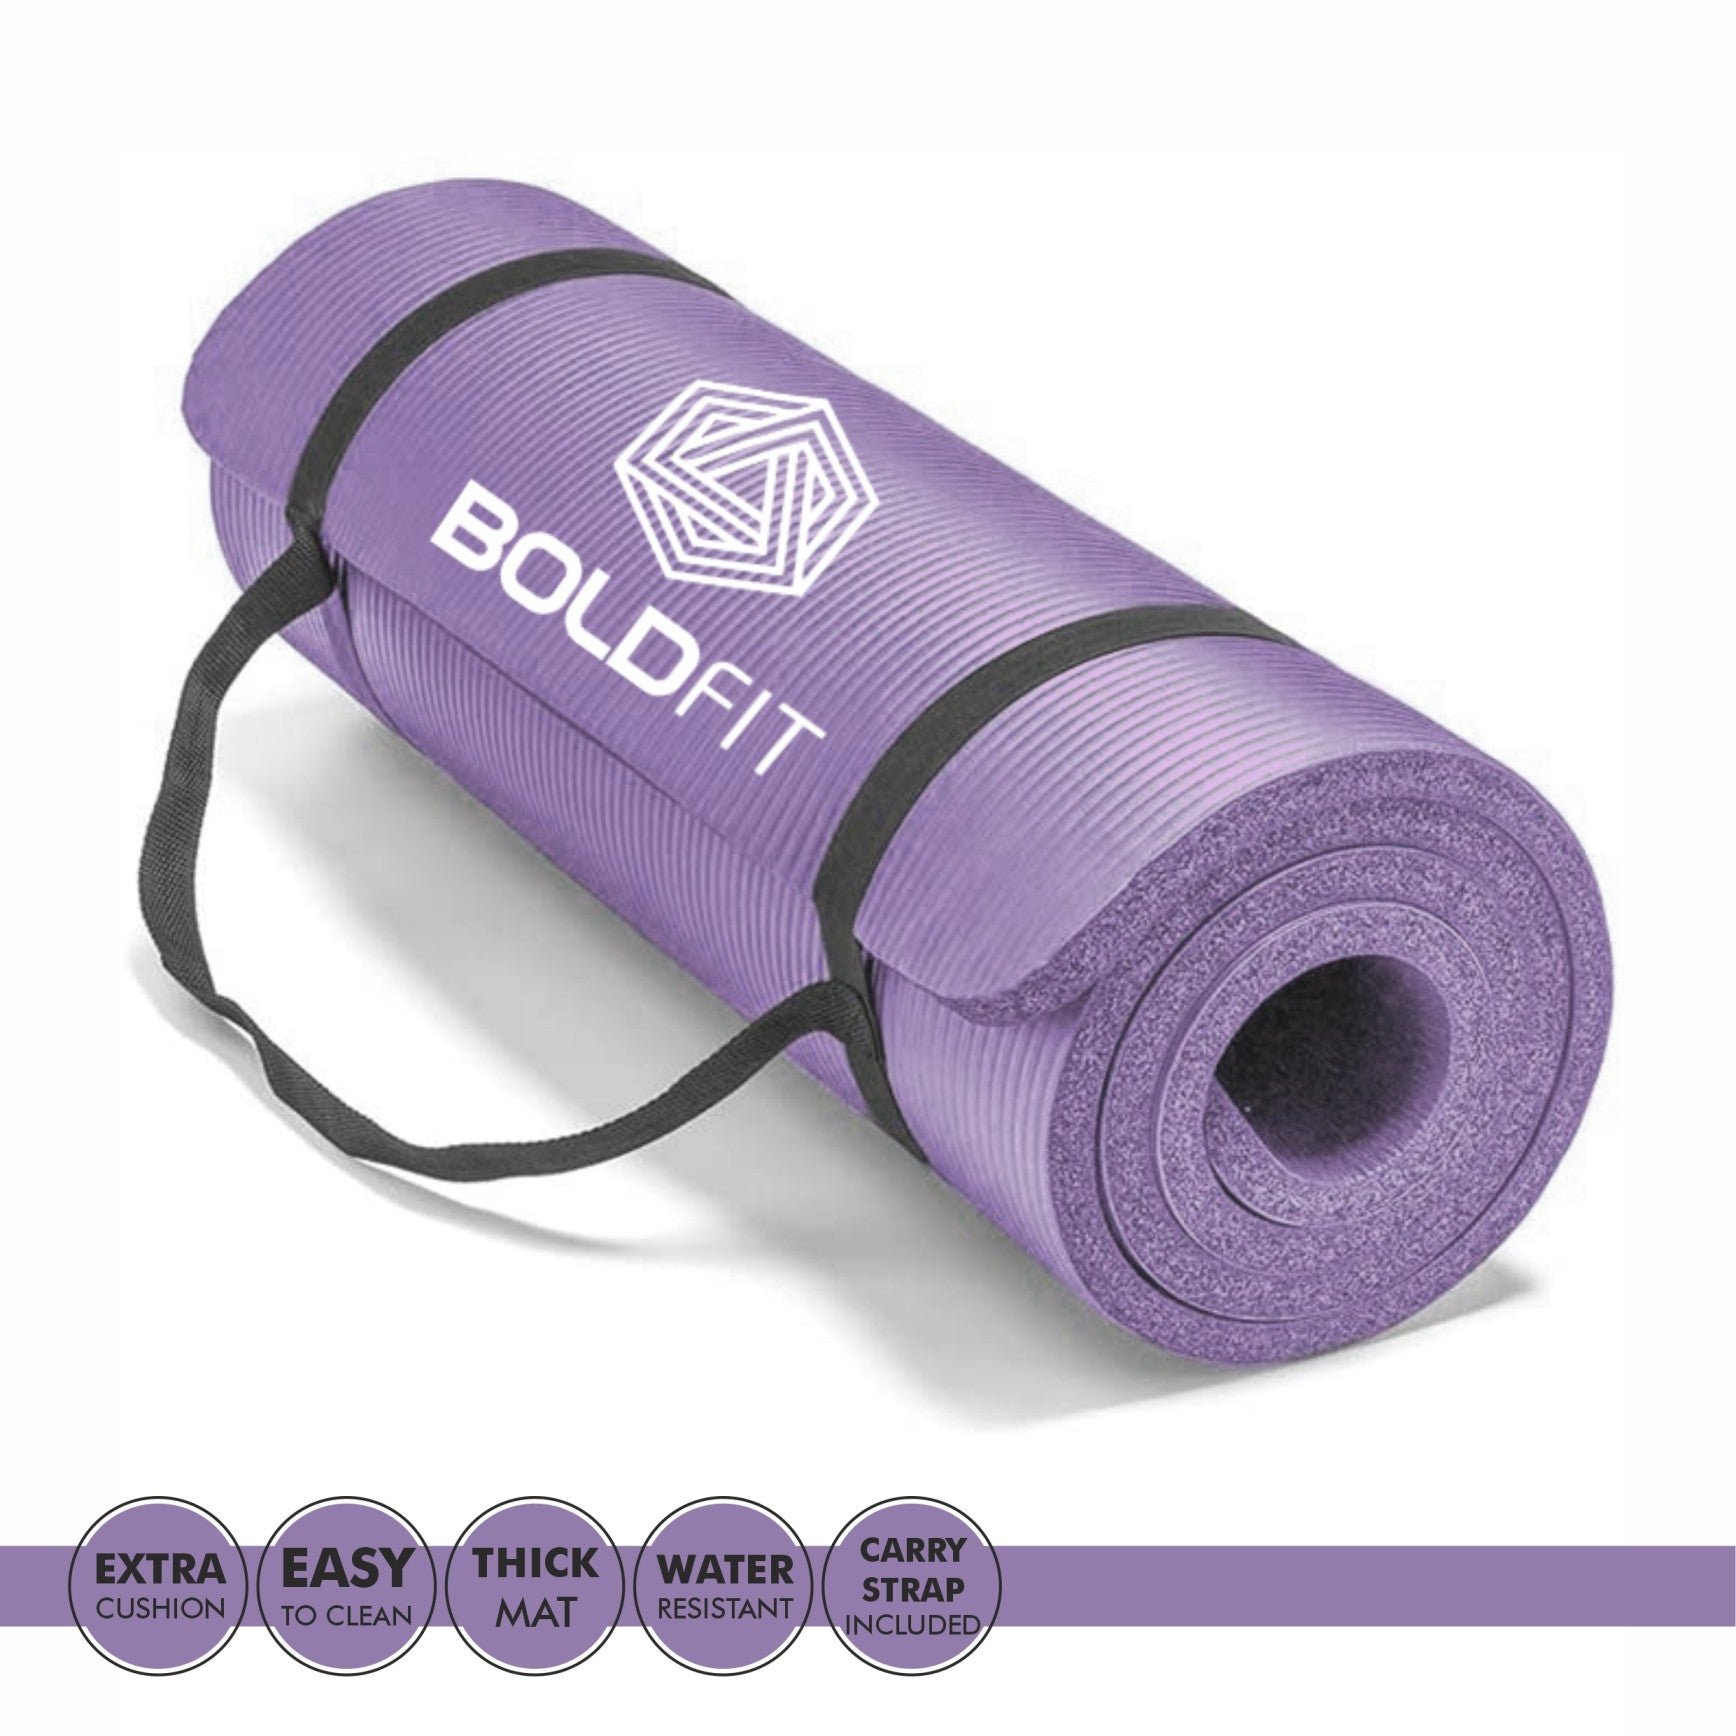 Boldfit NBR Yoga mat for men and women with Carrying Strap - BoldFit